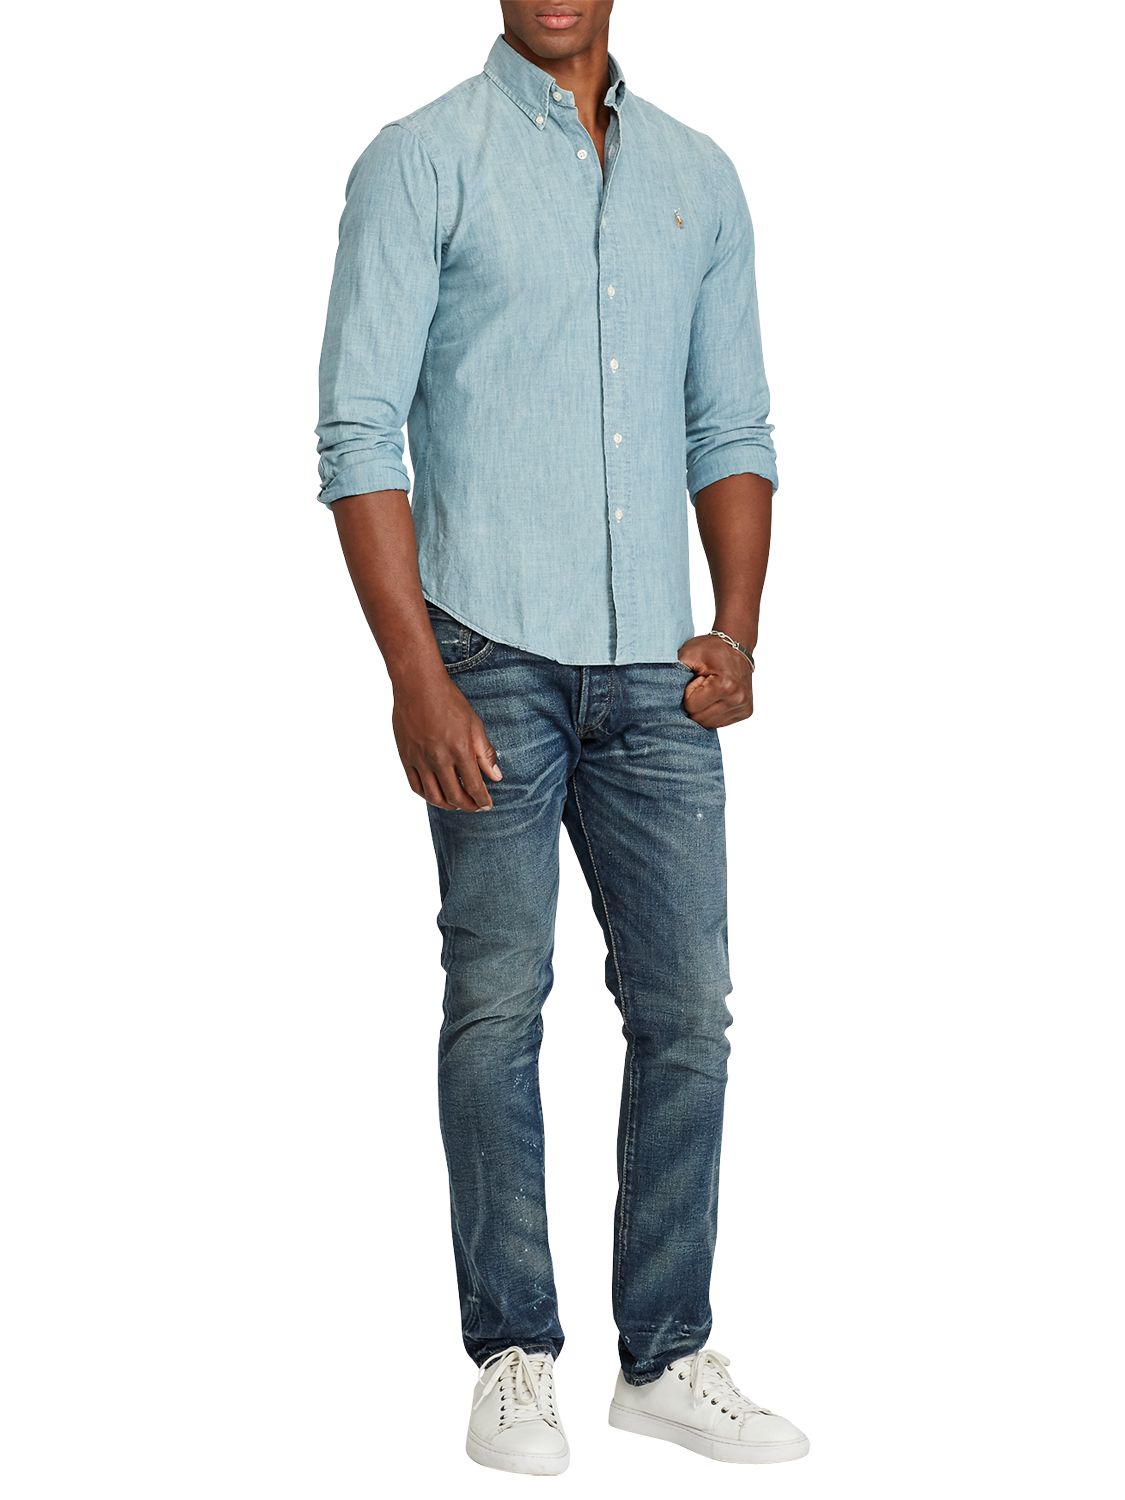 Daarom Net zo mannetje Polo Ralph Lauren Chambray Slim Fit Shirt, Chambray at John Lewis & Partners